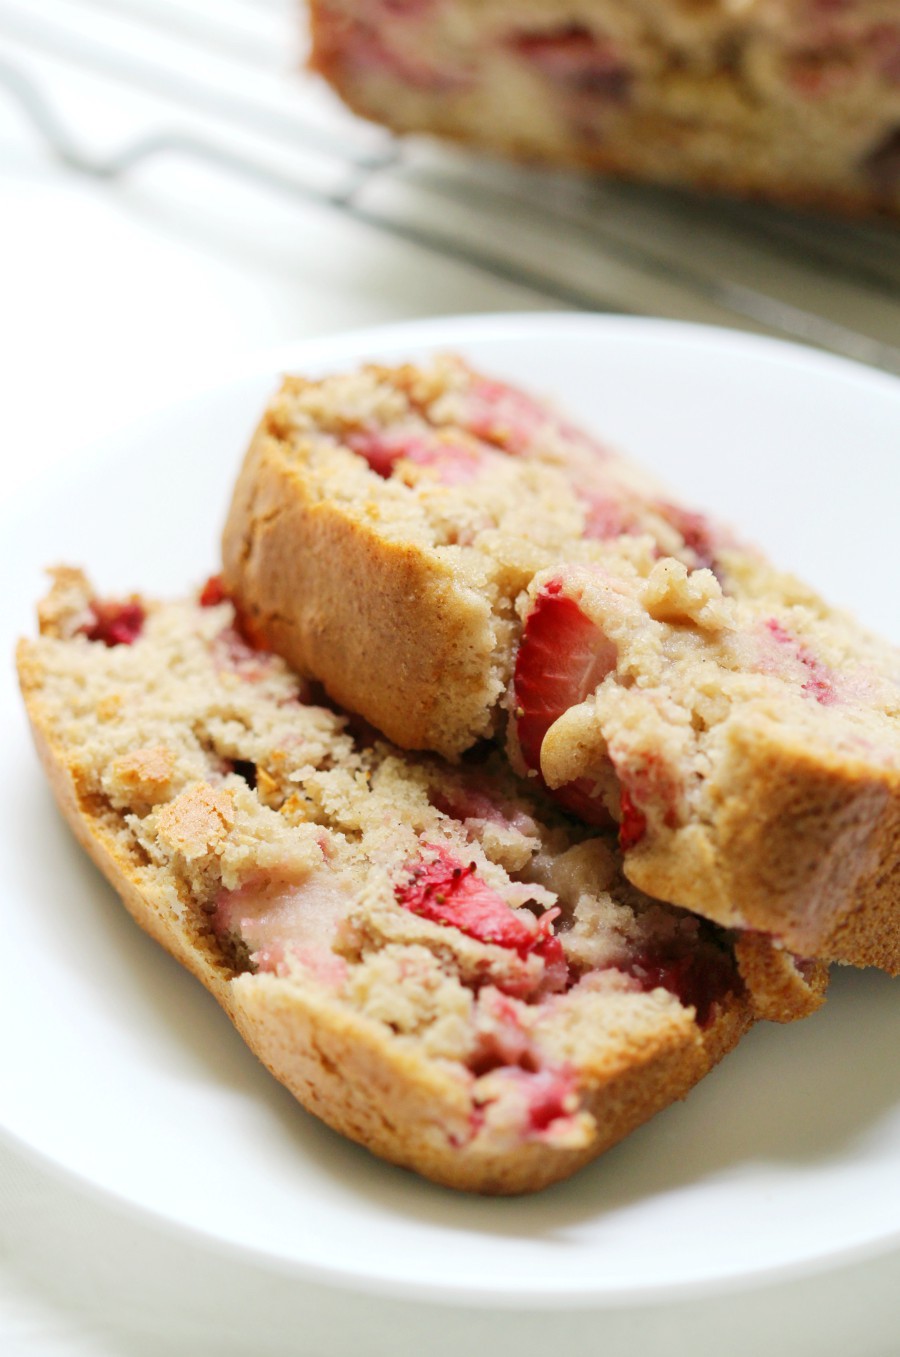 Gluten-Free Strawberry Quick Bread (Vegan, Allergy-Free) | Strength and Sunshine @RebeccaGF666 Put those ripe strawberries to good use in this healthy, sweet, and delicious quick bread recipe! This Gluten-Free Strawberry Quick Bread is vegan, allergy-free, and perfect for breakfast, brunch, dessert, or as a seasonal snack! It's spring and summer baking at its finest! 